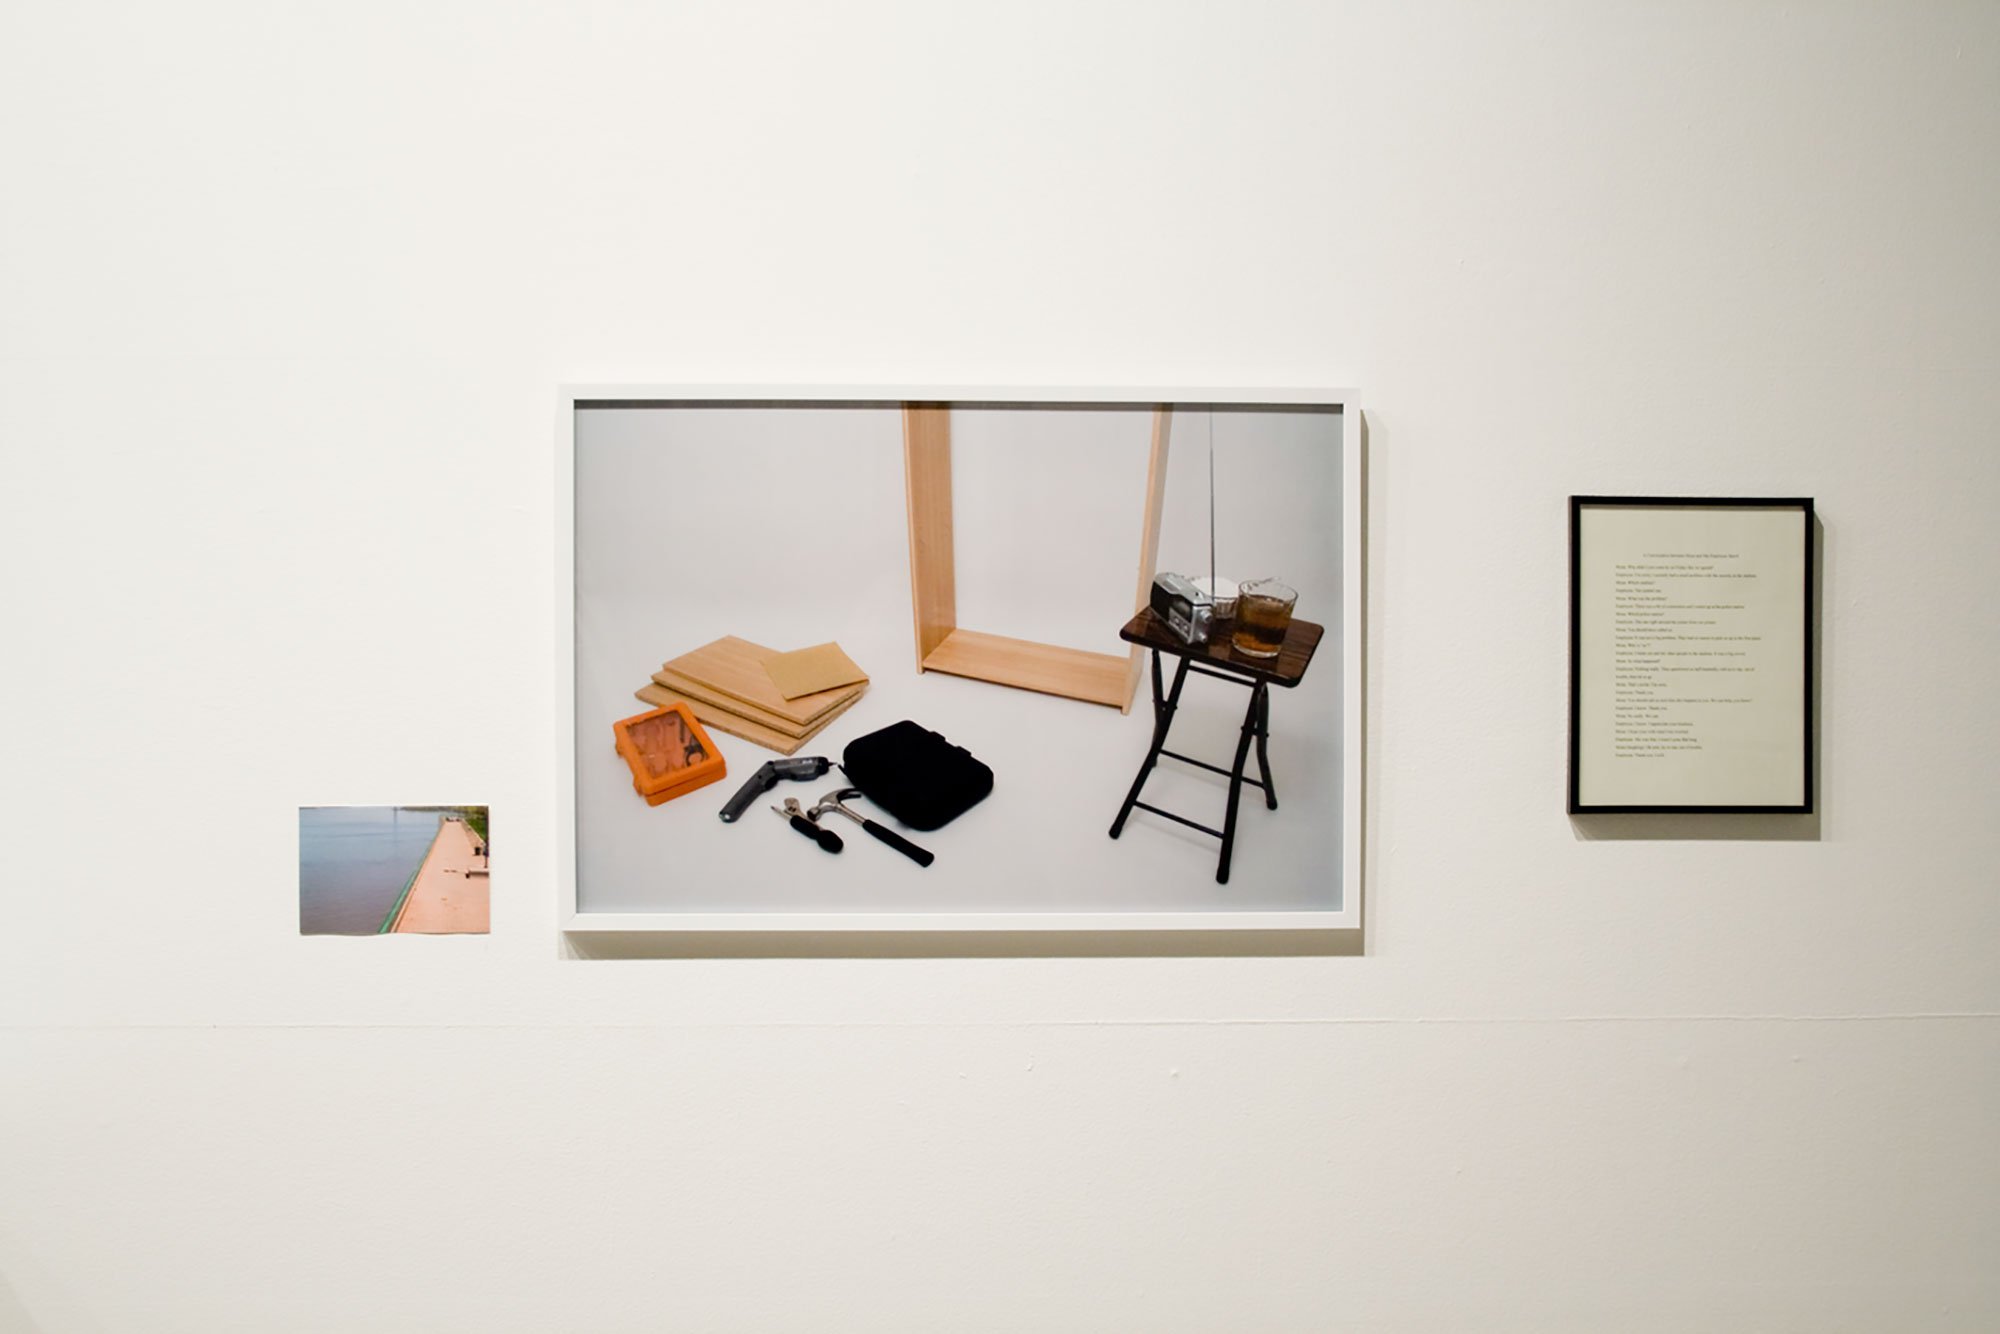 Iman Issa, Triptych #6, photographs, text, dimensions variable, 2009